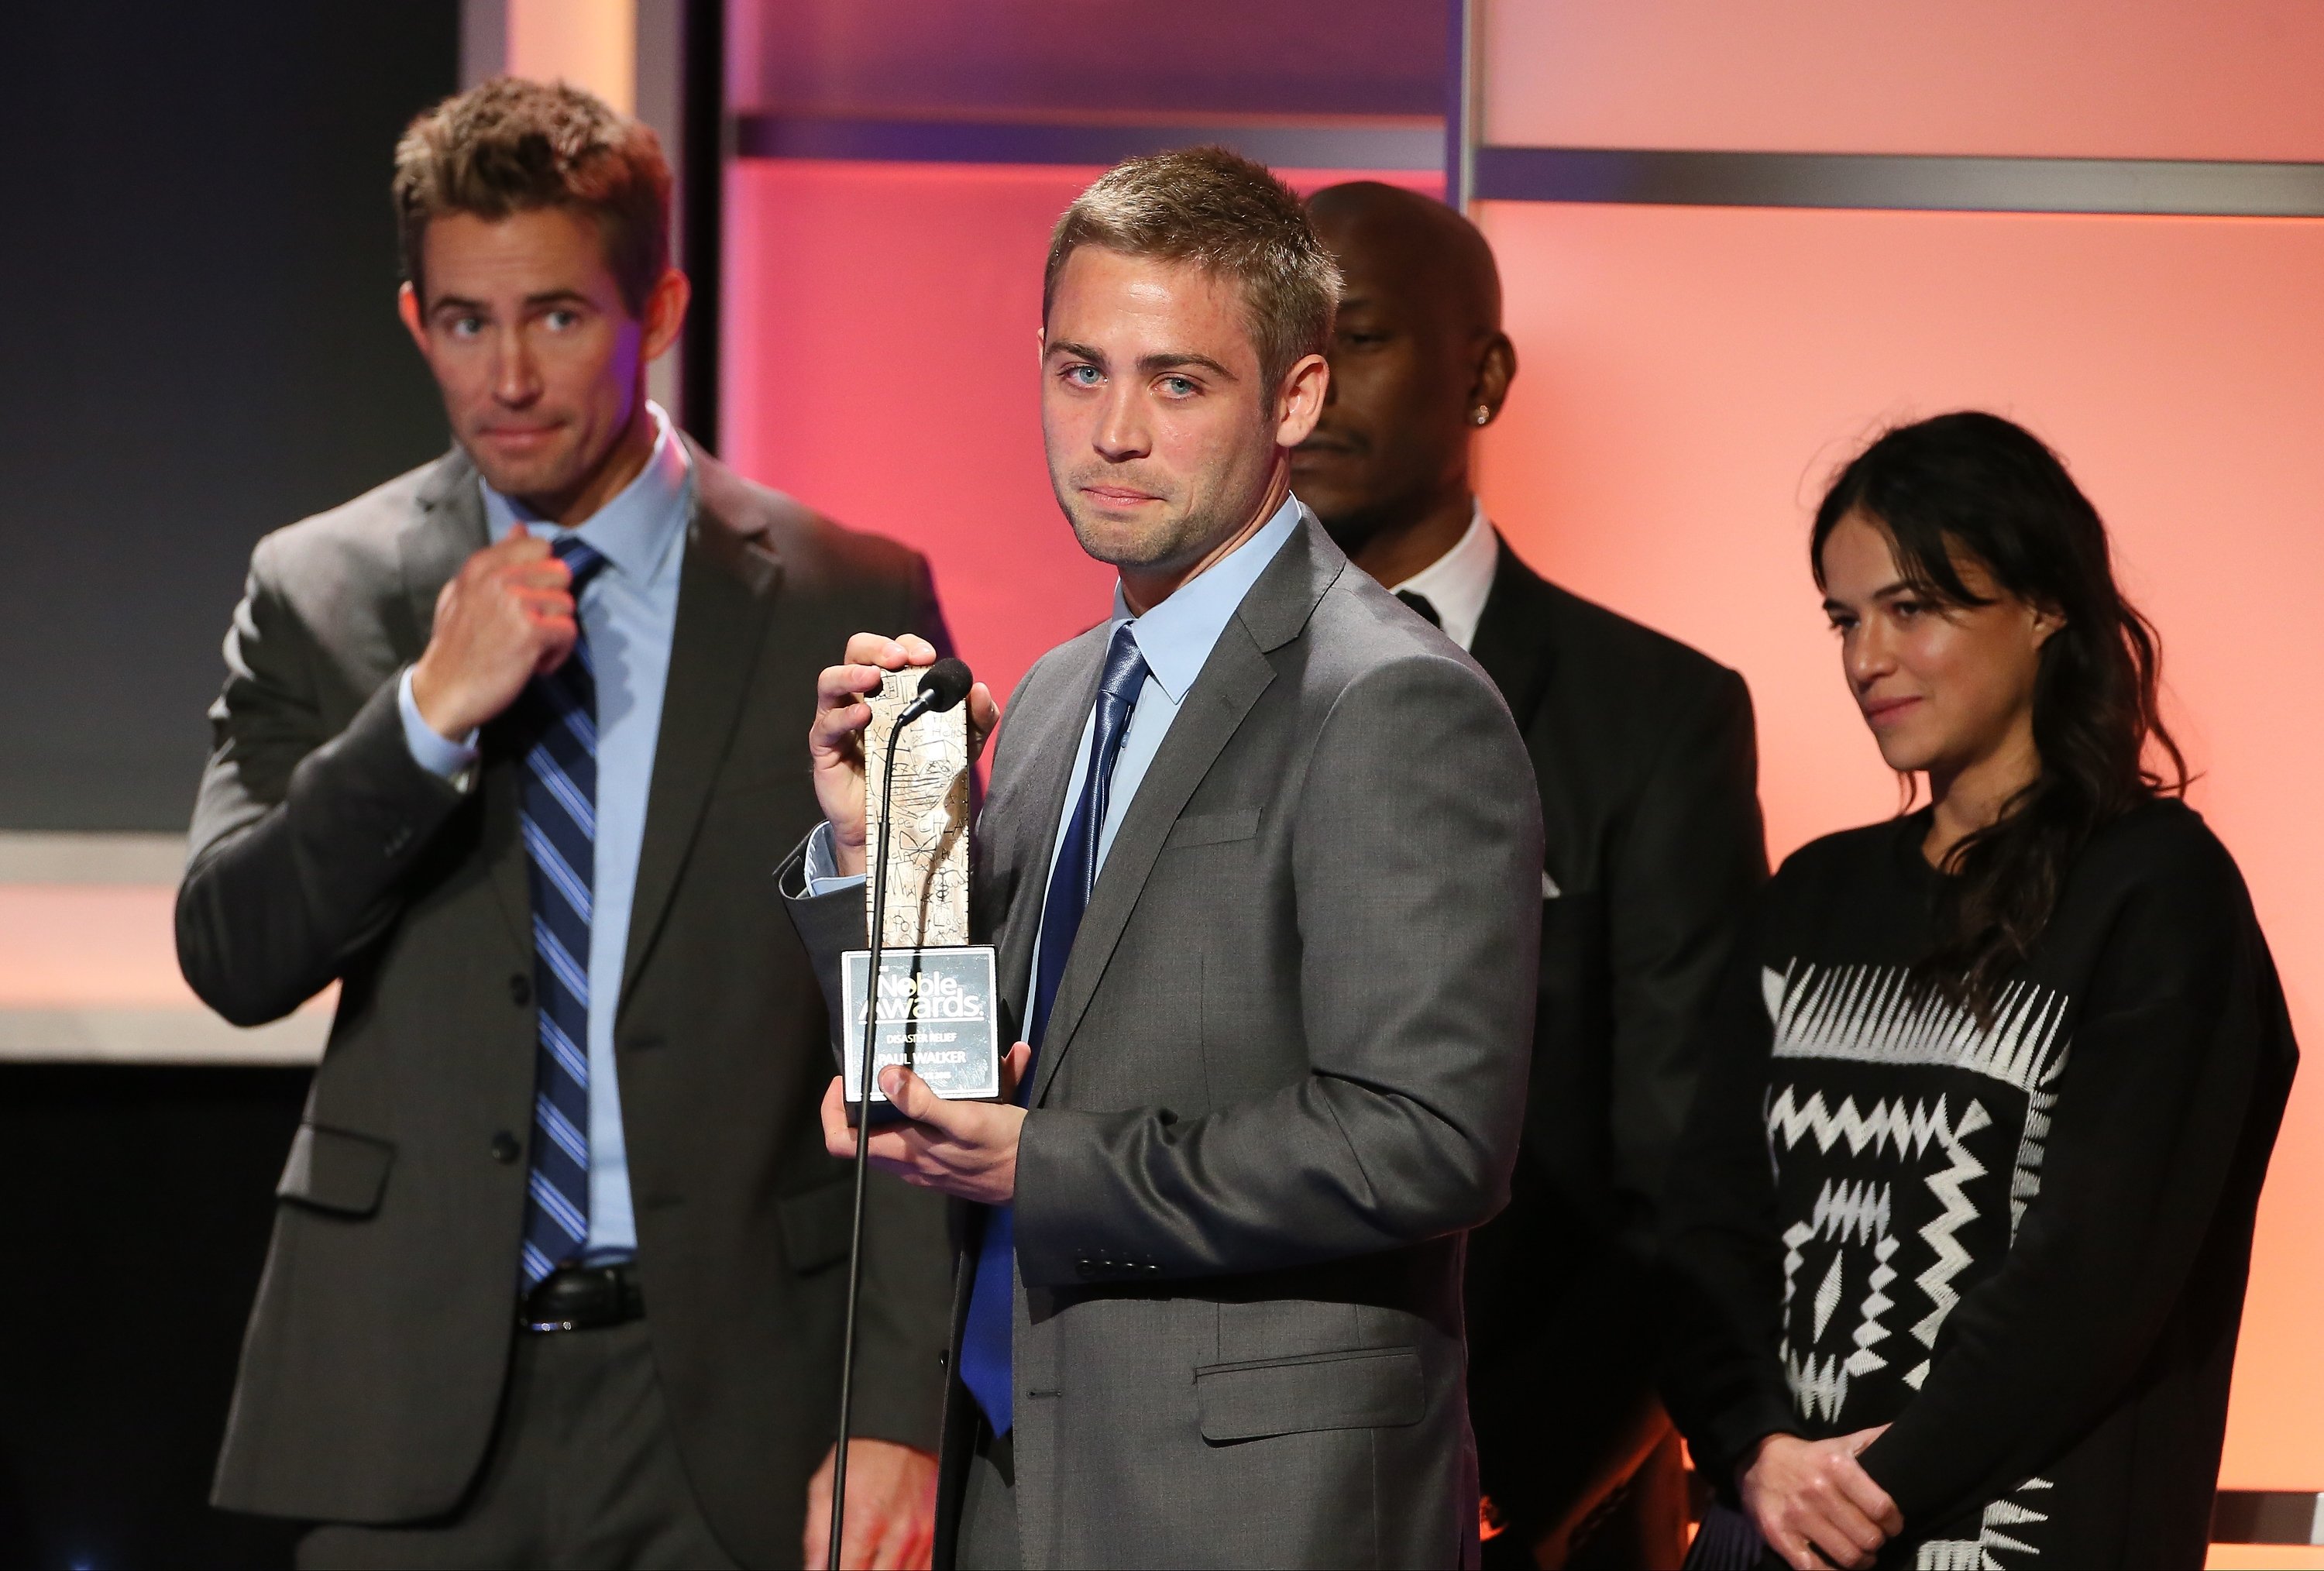 Michelle Rodriguez, Cody Walker, Caleb Walker and Tyrese Gibson on stage during the 3rd Annual Noble Awards on February 27, 2015 in Beverly Hills. | Source: Getty Images